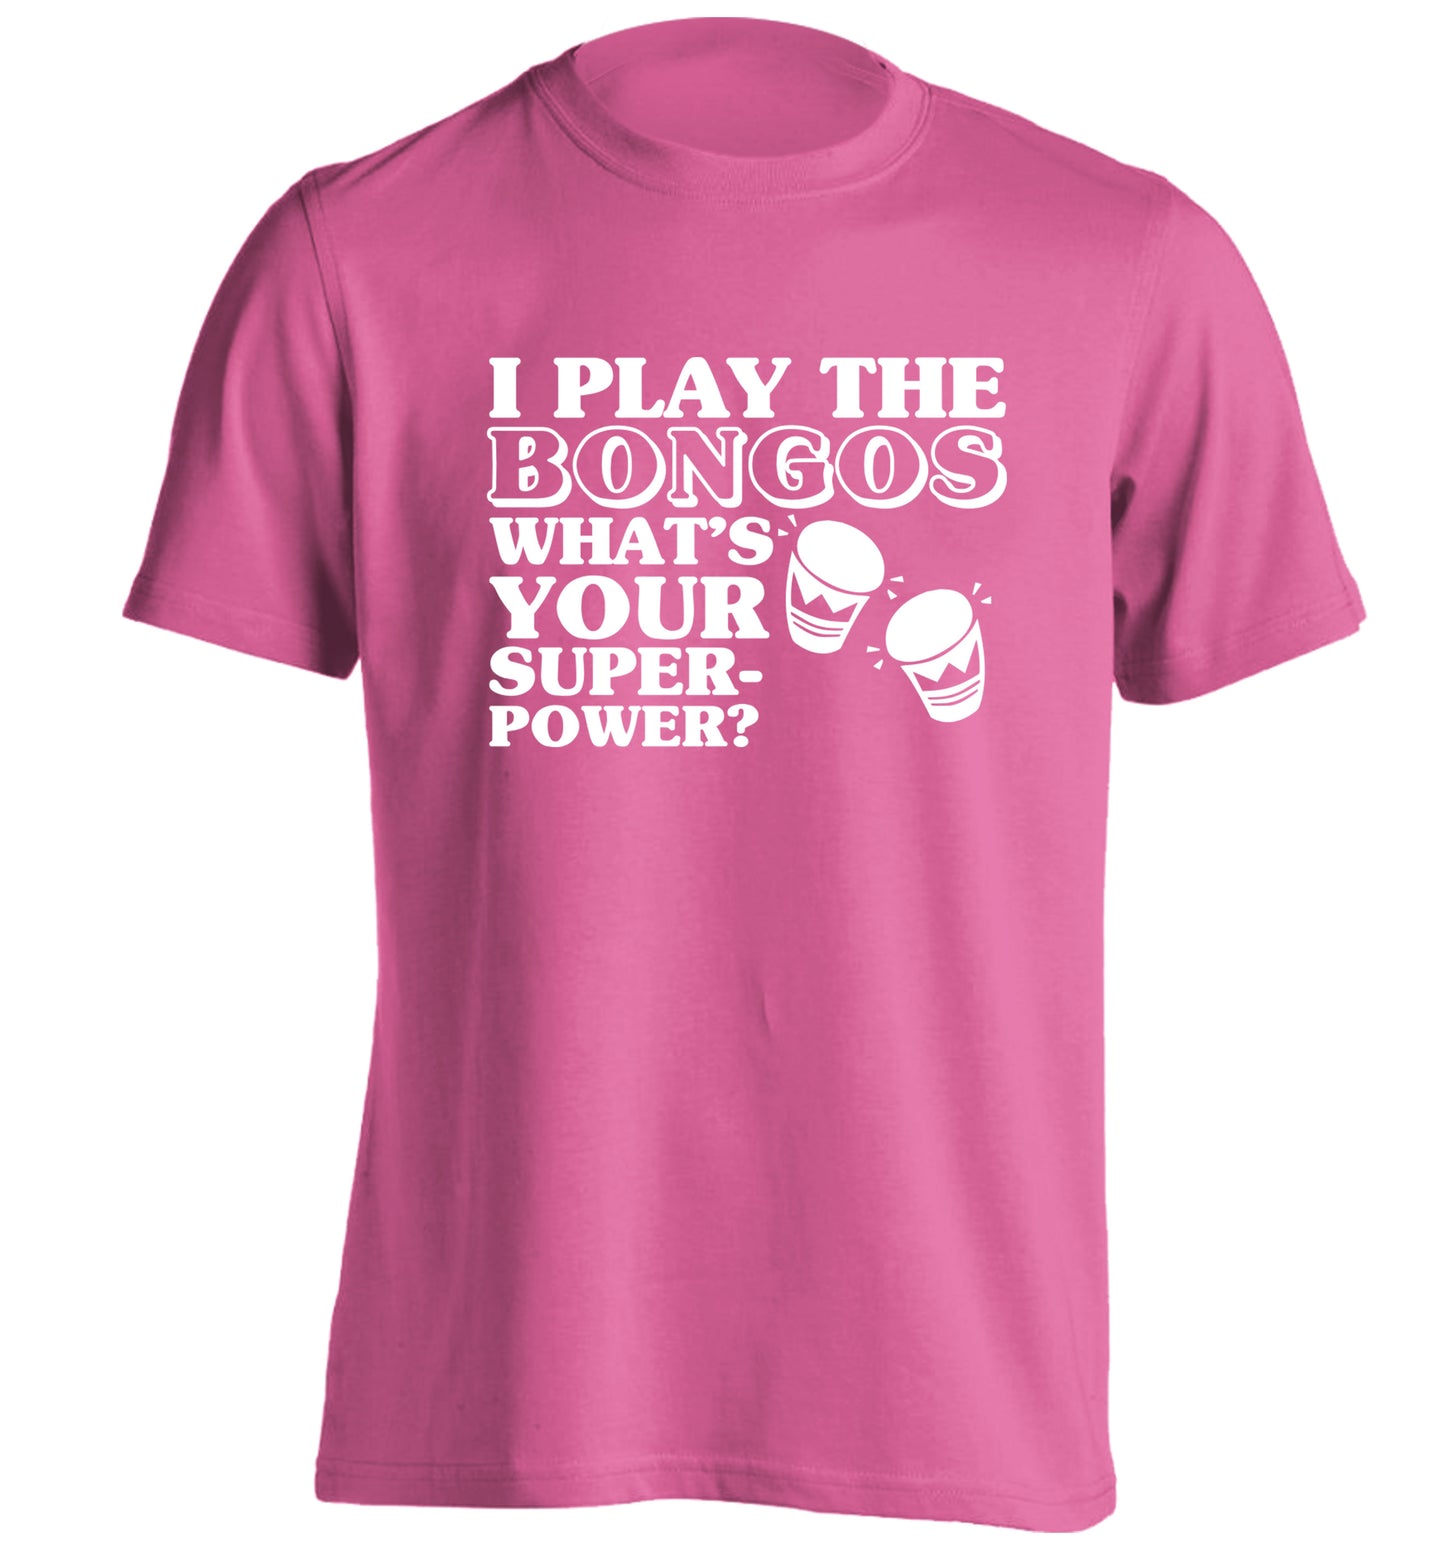 I play the bongos what's your superpower? adults unisexpink Tshirt 2XL